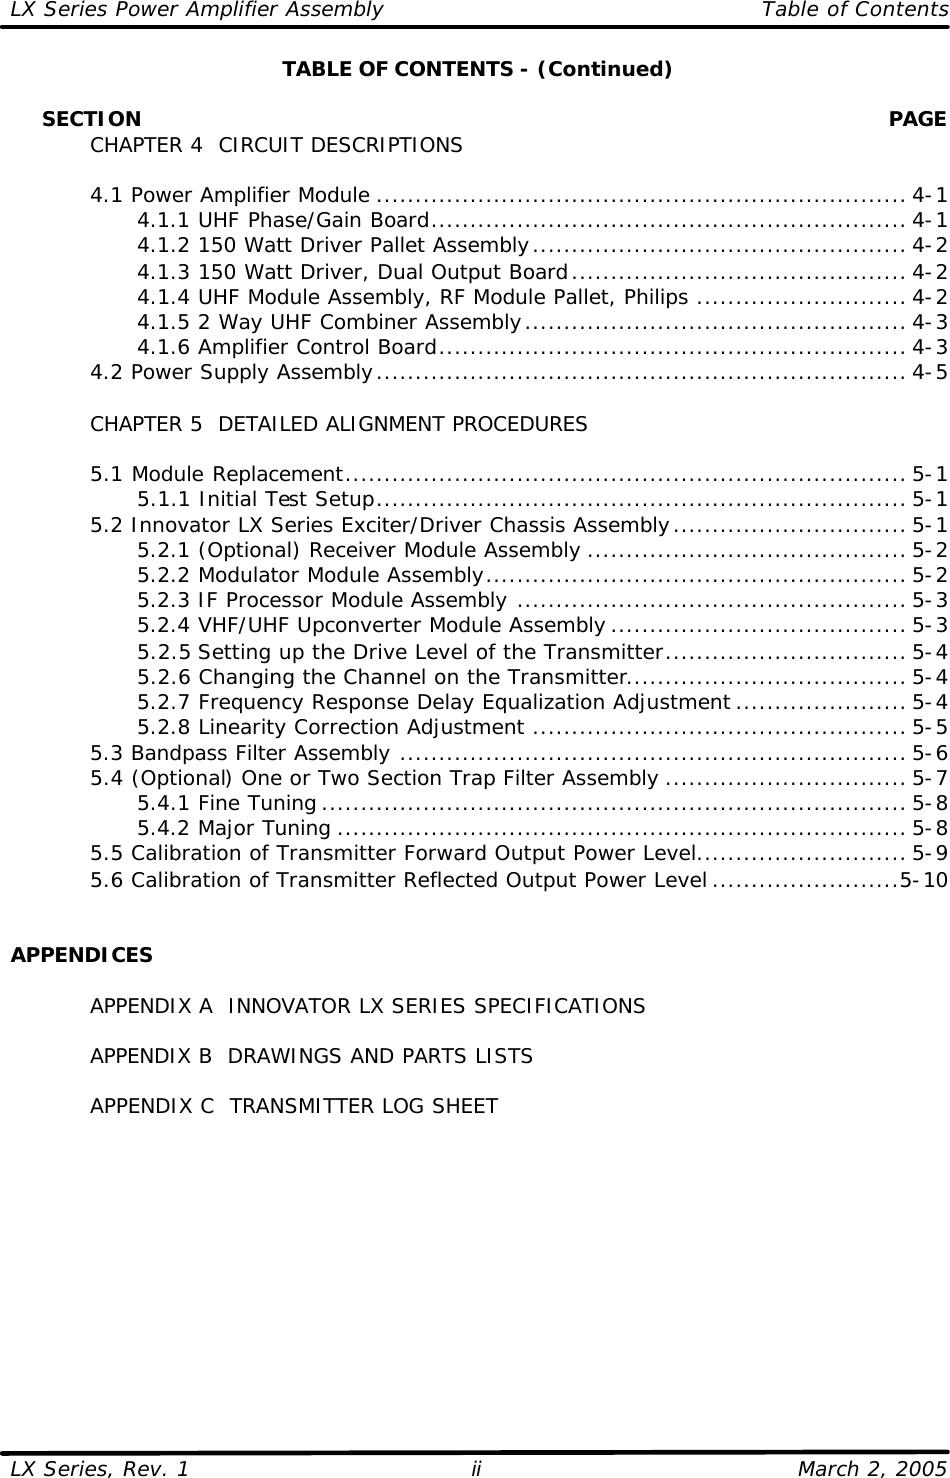 LX Series Power Amplifier Assembly    Table of Contents  LX Series, Rev. 1    March 2, 2005 ii TABLE OF CONTENTS - (Continued)       SECTION    PAGE  CHAPTER 4  CIRCUIT DESCRIPTIONS   4.1 Power Amplifier Module .................................................................... 4-1     4.1.1 UHF Phase/Gain Board............................................................. 4-1     4.1.2 150 Watt Driver Pallet Assembly................................................ 4-2     4.1.3 150 Watt Driver, Dual Output Board........................................... 4-2     4.1.4 UHF Module Assembly, RF Module Pallet, Philips ........................... 4-2     4.1.5 2 Way UHF Combiner Assembly................................................. 4-3     4.1.6 Amplifier Control Board............................................................ 4-3  4.2 Power Supply Assembly.................................................................... 4-5   CHAPTER 5  DETAILED ALIGNMENT PROCEDURES   5.1 Module Replacement........................................................................ 5-1     5.1.1 Initial Test Setup.................................................................... 5-1  5.2 Innovator LX Series Exciter/Driver Chassis Assembly.............................. 5-1     5.2.1 (Optional) Receiver Module Assembly ......................................... 5-2     5.2.2 Modulator Module Assembly...................................................... 5-2     5.2.3 IF Processor Module Assembly .................................................. 5-3     5.2.4 VHF/UHF Upconverter Module Assembly ...................................... 5-3     5.2.5 Setting up the Drive Level of the Transmitter............................... 5-4     5.2.6 Changing the Channel on the Transmitter.................................... 5-4     5.2.7 Frequency Response Delay Equalization Adjustment ...................... 5-4     5.2.8 Linearity Correction Adjustment ................................................ 5-5  5.3 Bandpass Filter Assembly ................................................................. 5-6  5.4 (Optional) One or Two Section Trap Filter Assembly ............................... 5-7     5.4.1 Fine Tuning ........................................................................... 5-8     5.4.2 Major Tuning ......................................................................... 5-8  5.5 Calibration of Transmitter Forward Output Power Level........................... 5-9  5.6 Calibration of Transmitter Reflected Output Power Level ........................5-10   APPENDICES   APPENDIX A  INNOVATOR LX SERIES SPECIFICATIONS   APPENDIX B  DRAWINGS AND PARTS LISTS   APPENDIX C  TRANSMITTER LOG SHEET   